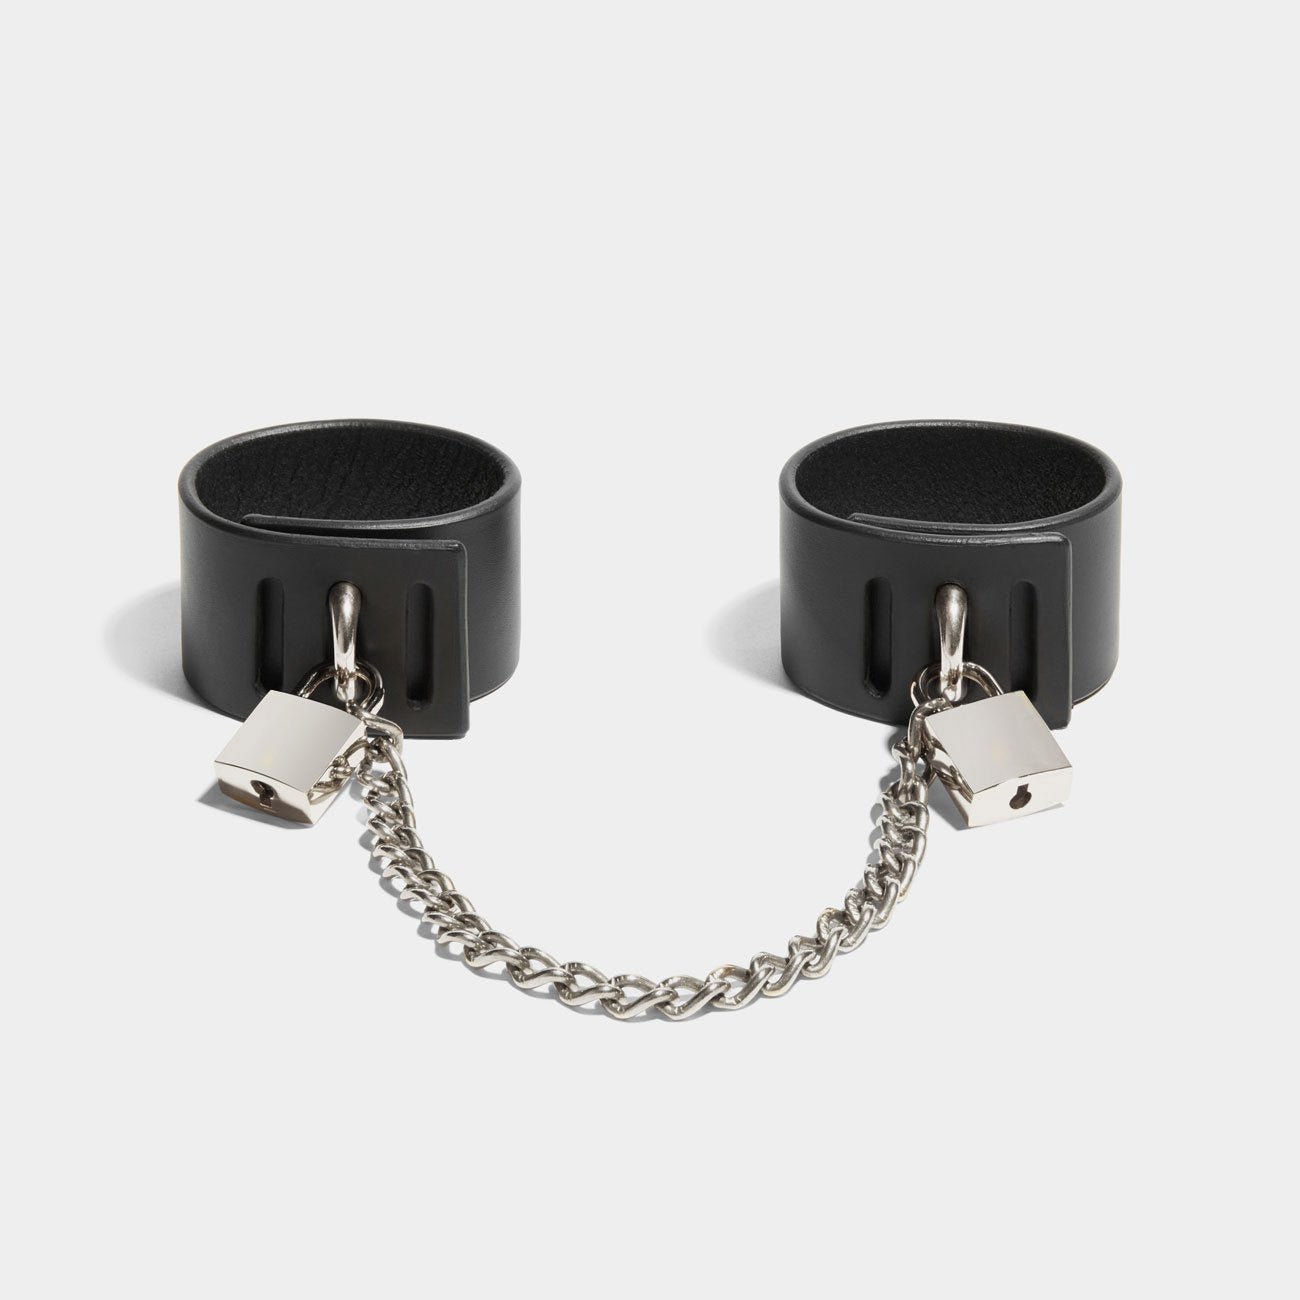 Padlock Cuffs With Chain - Ankle